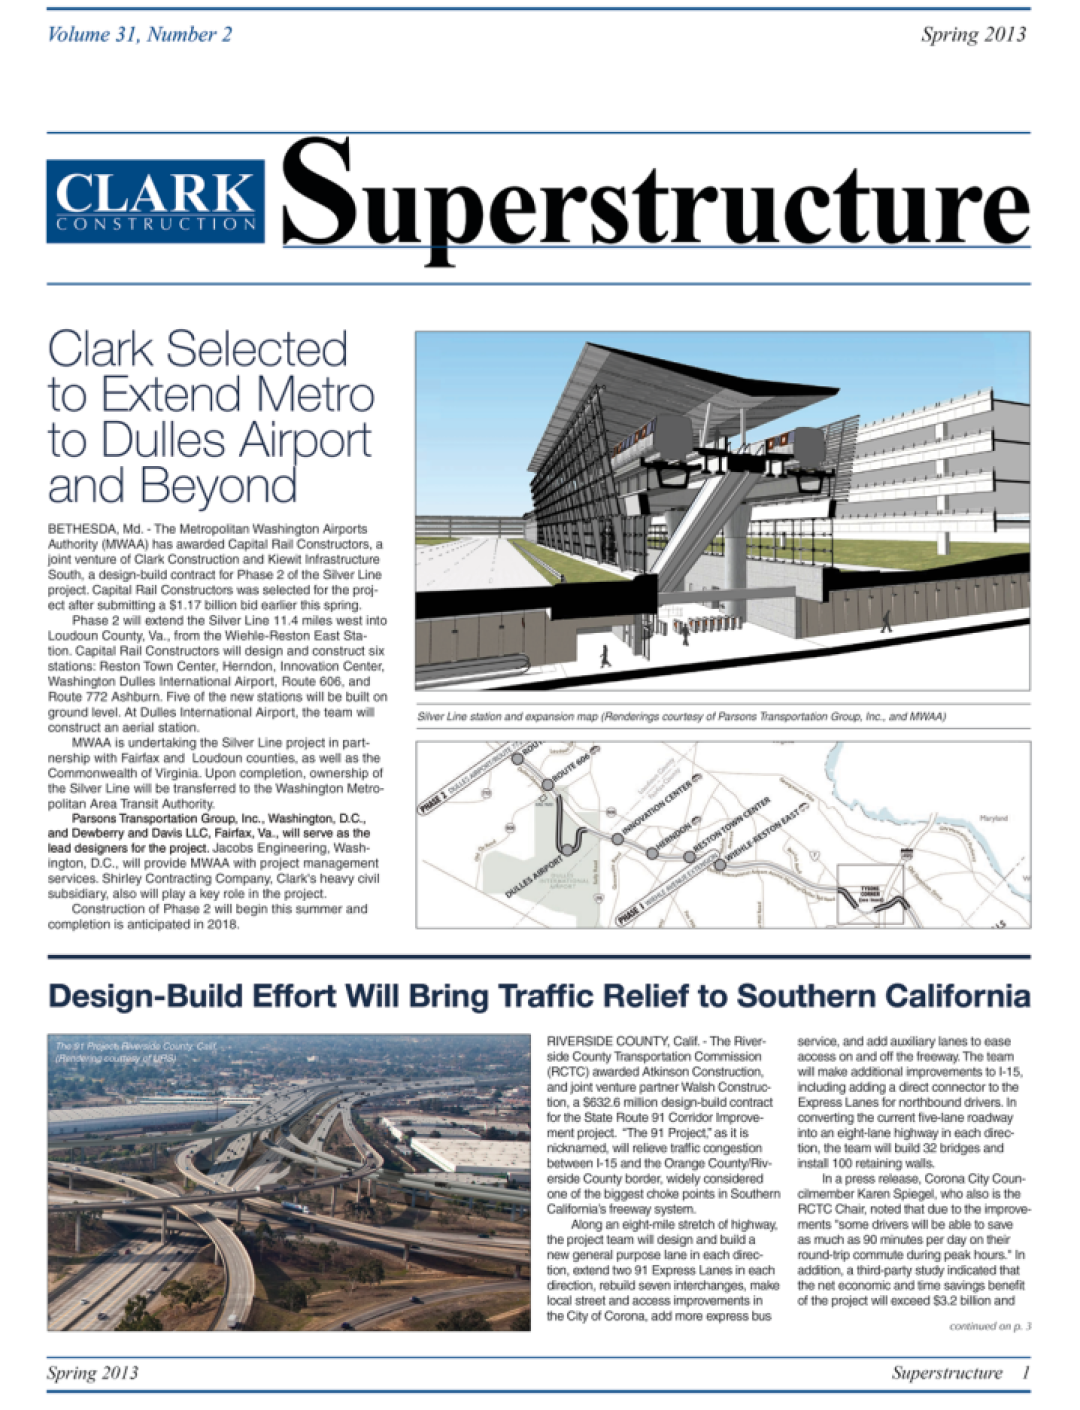 Superstructure Spring 2013